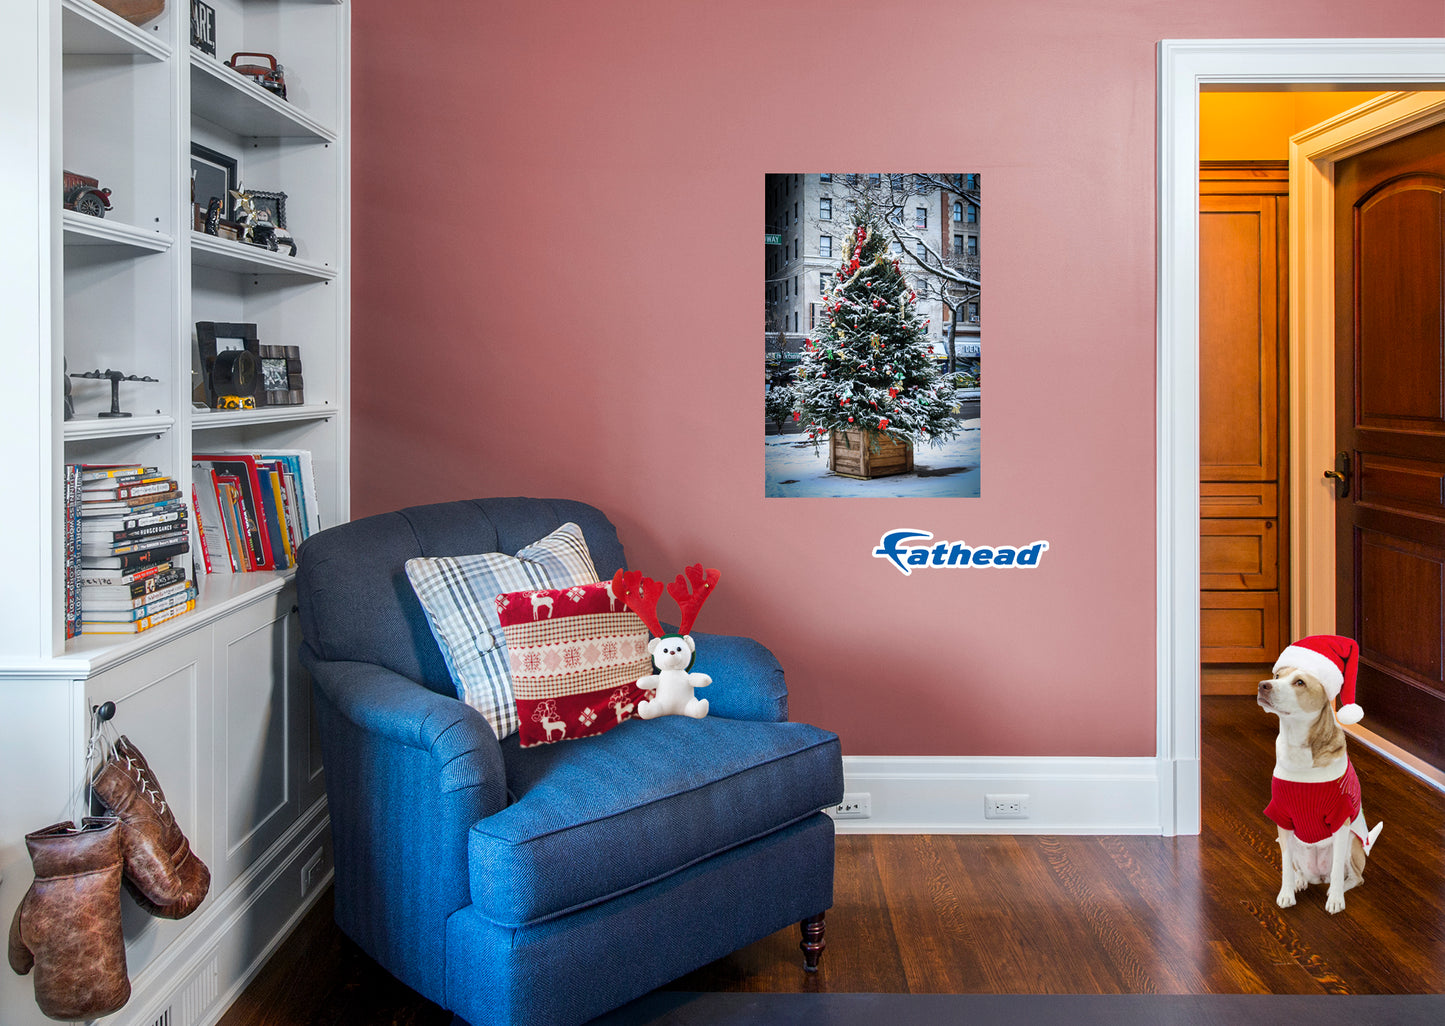 Christmas:  Tree in a Box Poster        -   Removable     Adhesive Decal